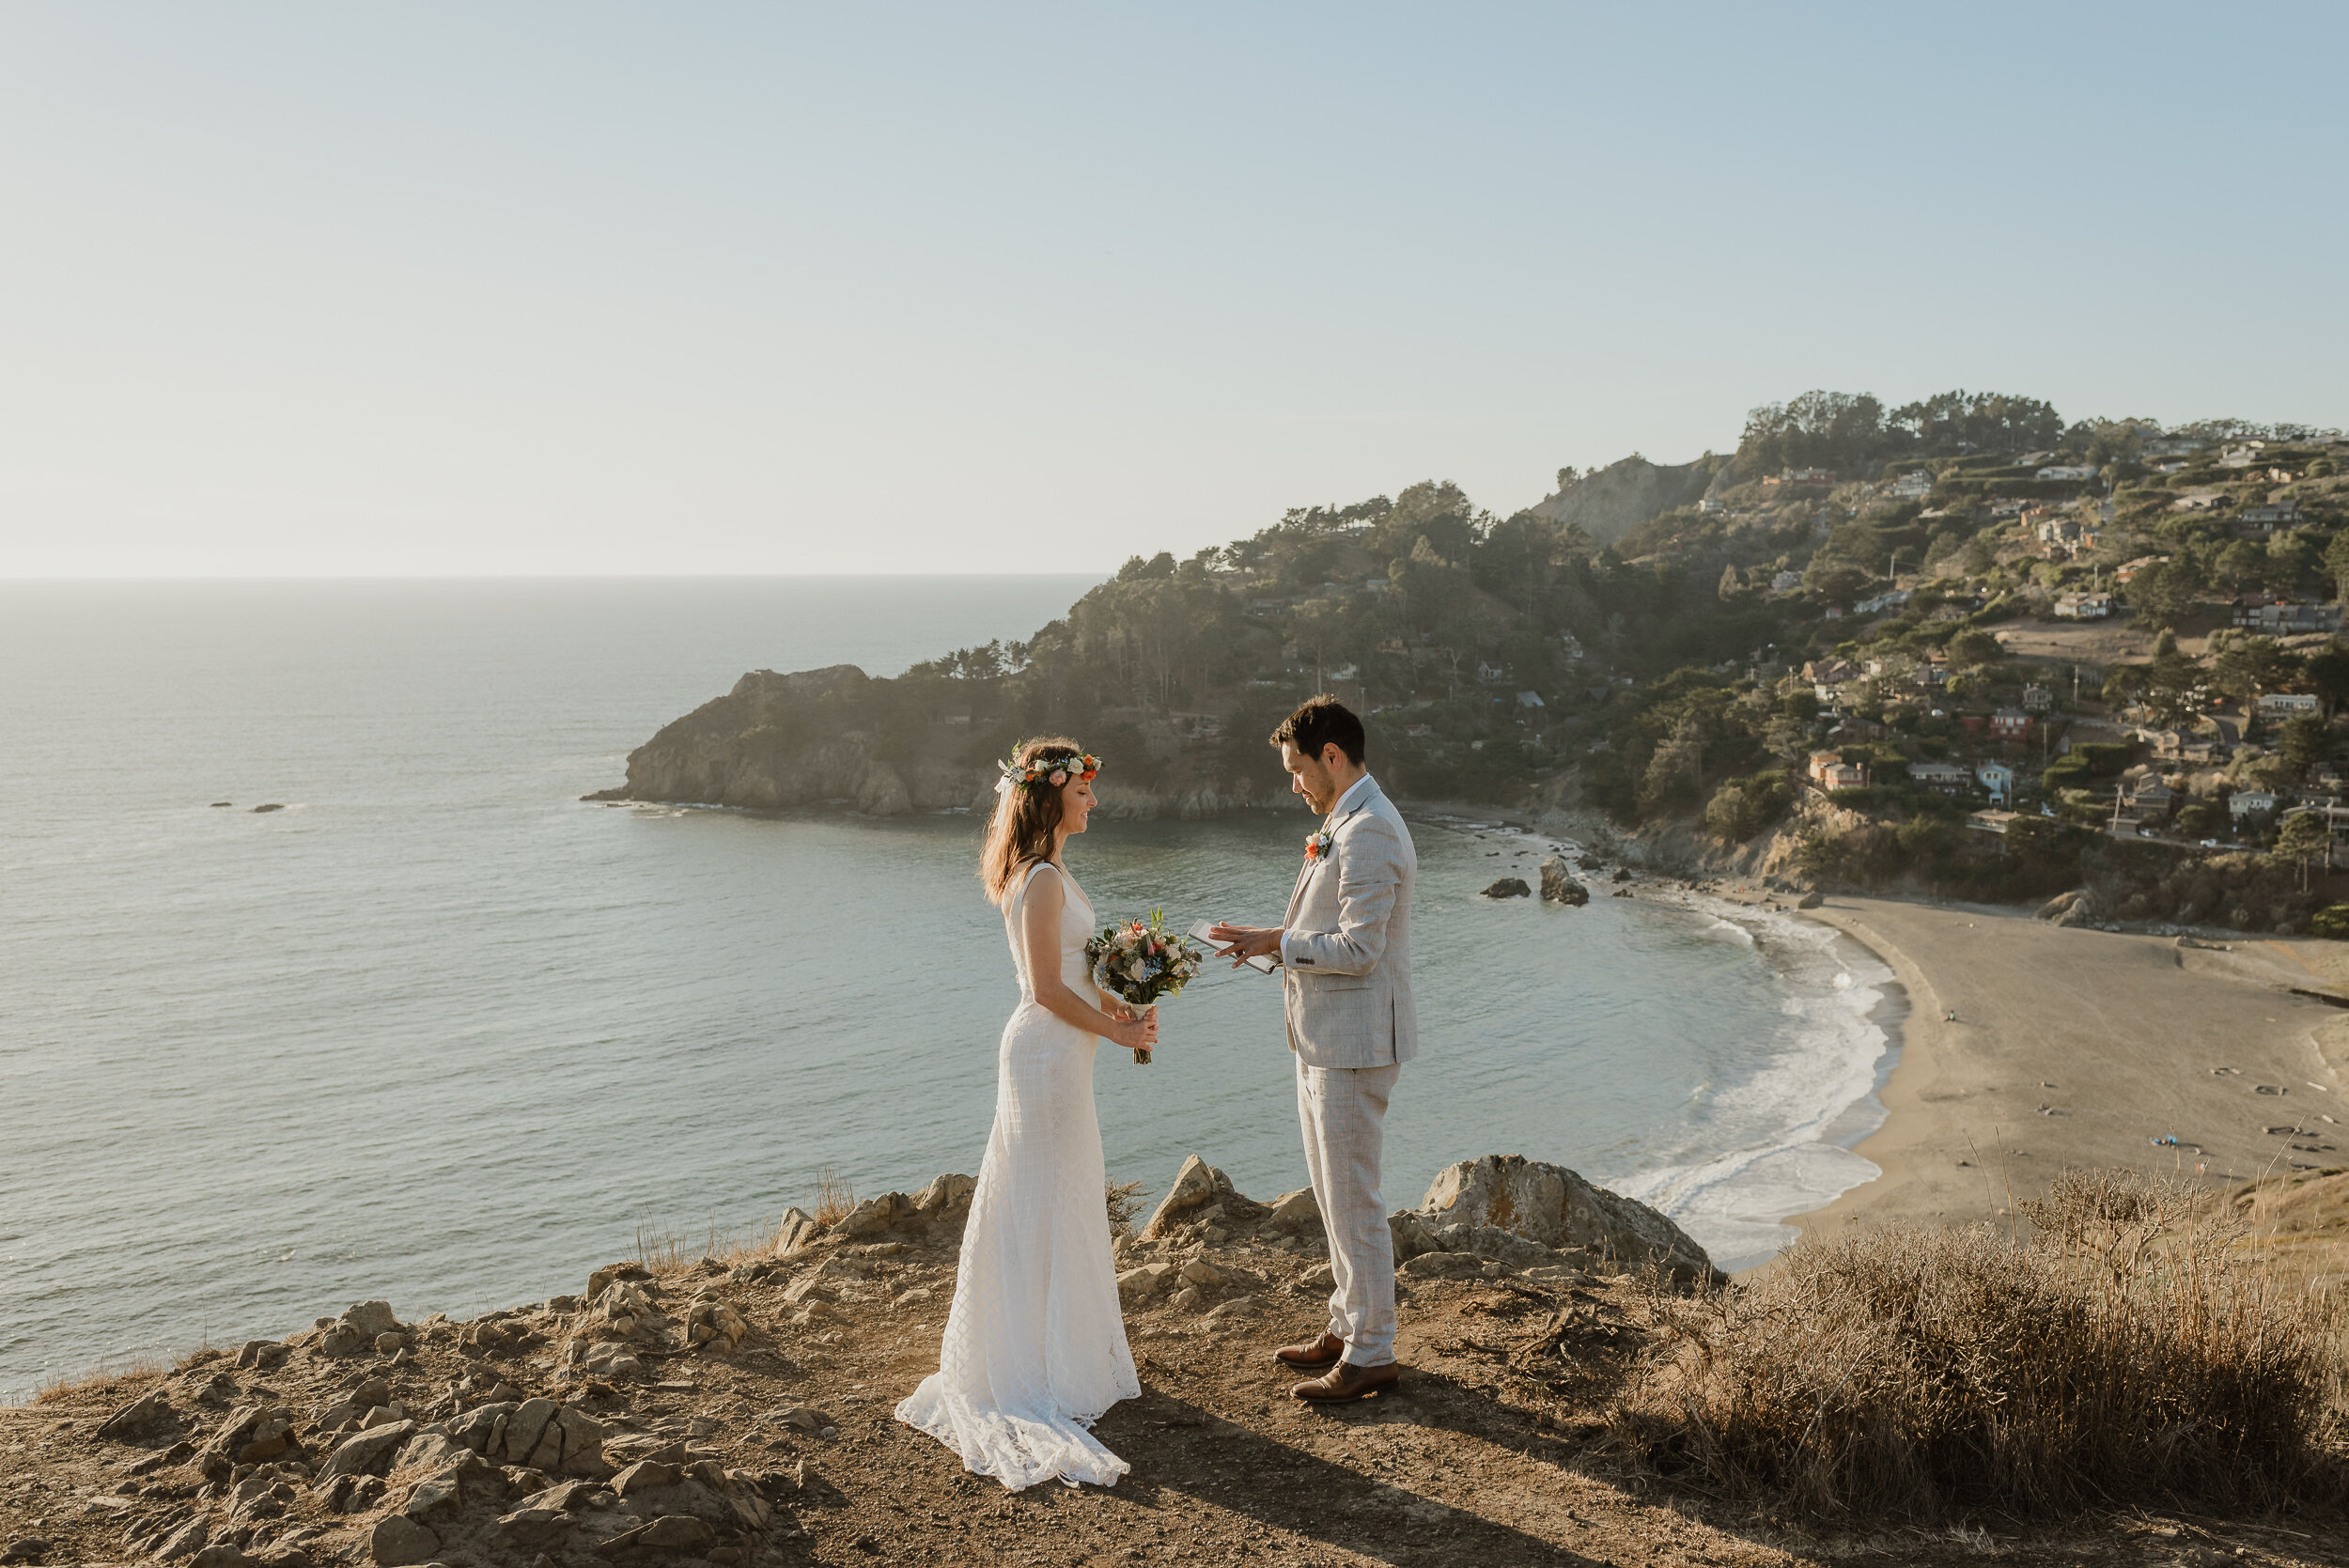 Five Reasons Why Bay Area Elopements are the Best - A Guide for Planning  your Intimate Celebration — Vivian Chen